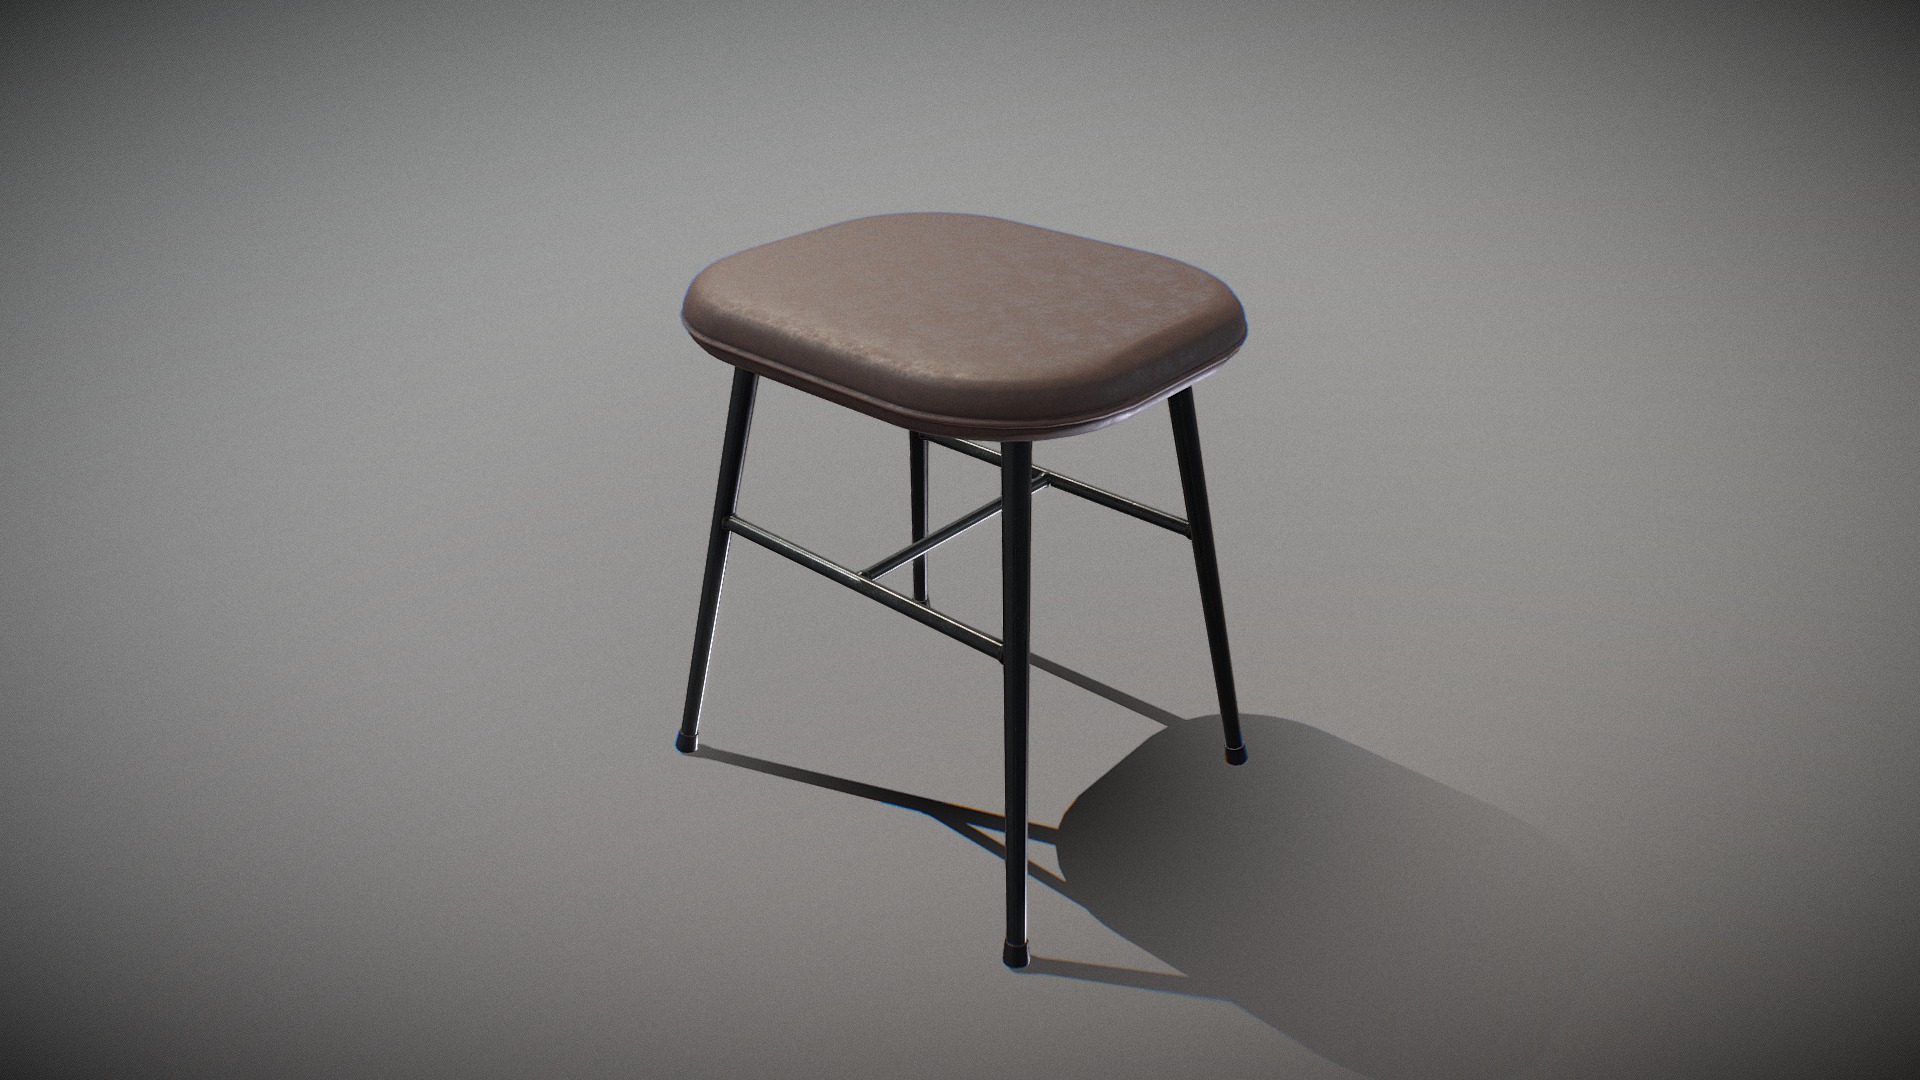 3D model Spine metal base stool-leather - This is a 3D model of the Spine metal base stool-leather. The 3D model is about a stool on a white background.